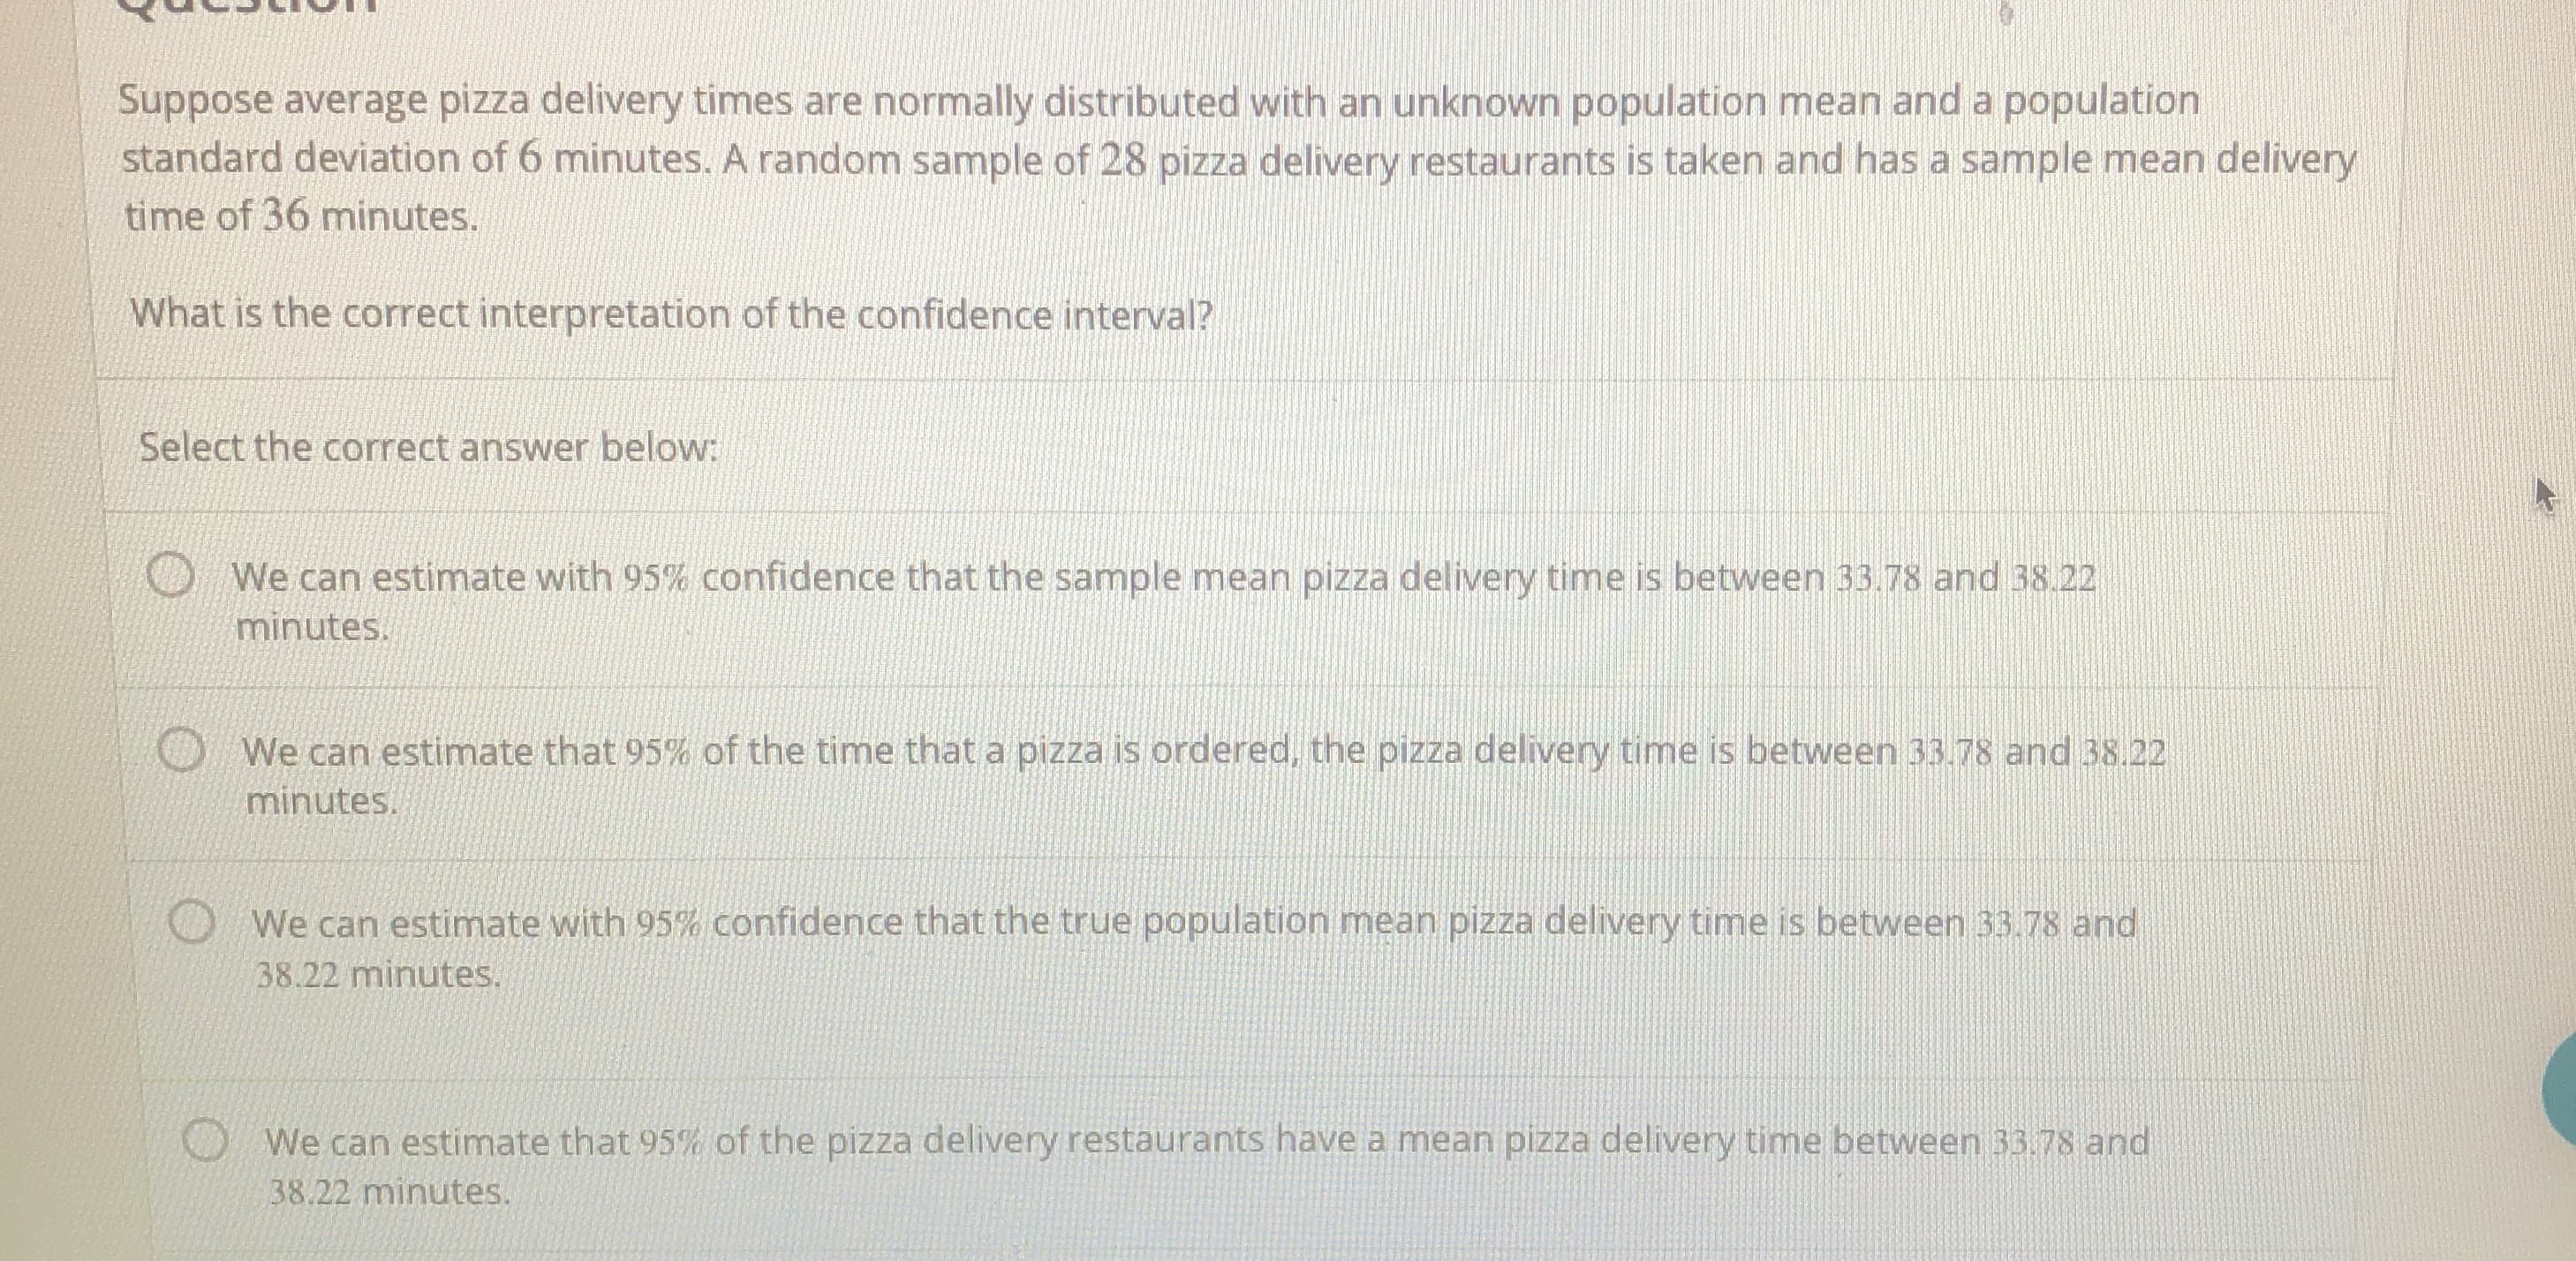 Suppose average pizza delivery times are normally distributed with an unknown population mean and a population
standard deviation of 6 minutes. A random sample of 28 pizza delivery restaurants is taken and has a sample mean delivery
time of 36 minutes.
What is the correct interpretation of the confidence interval?
